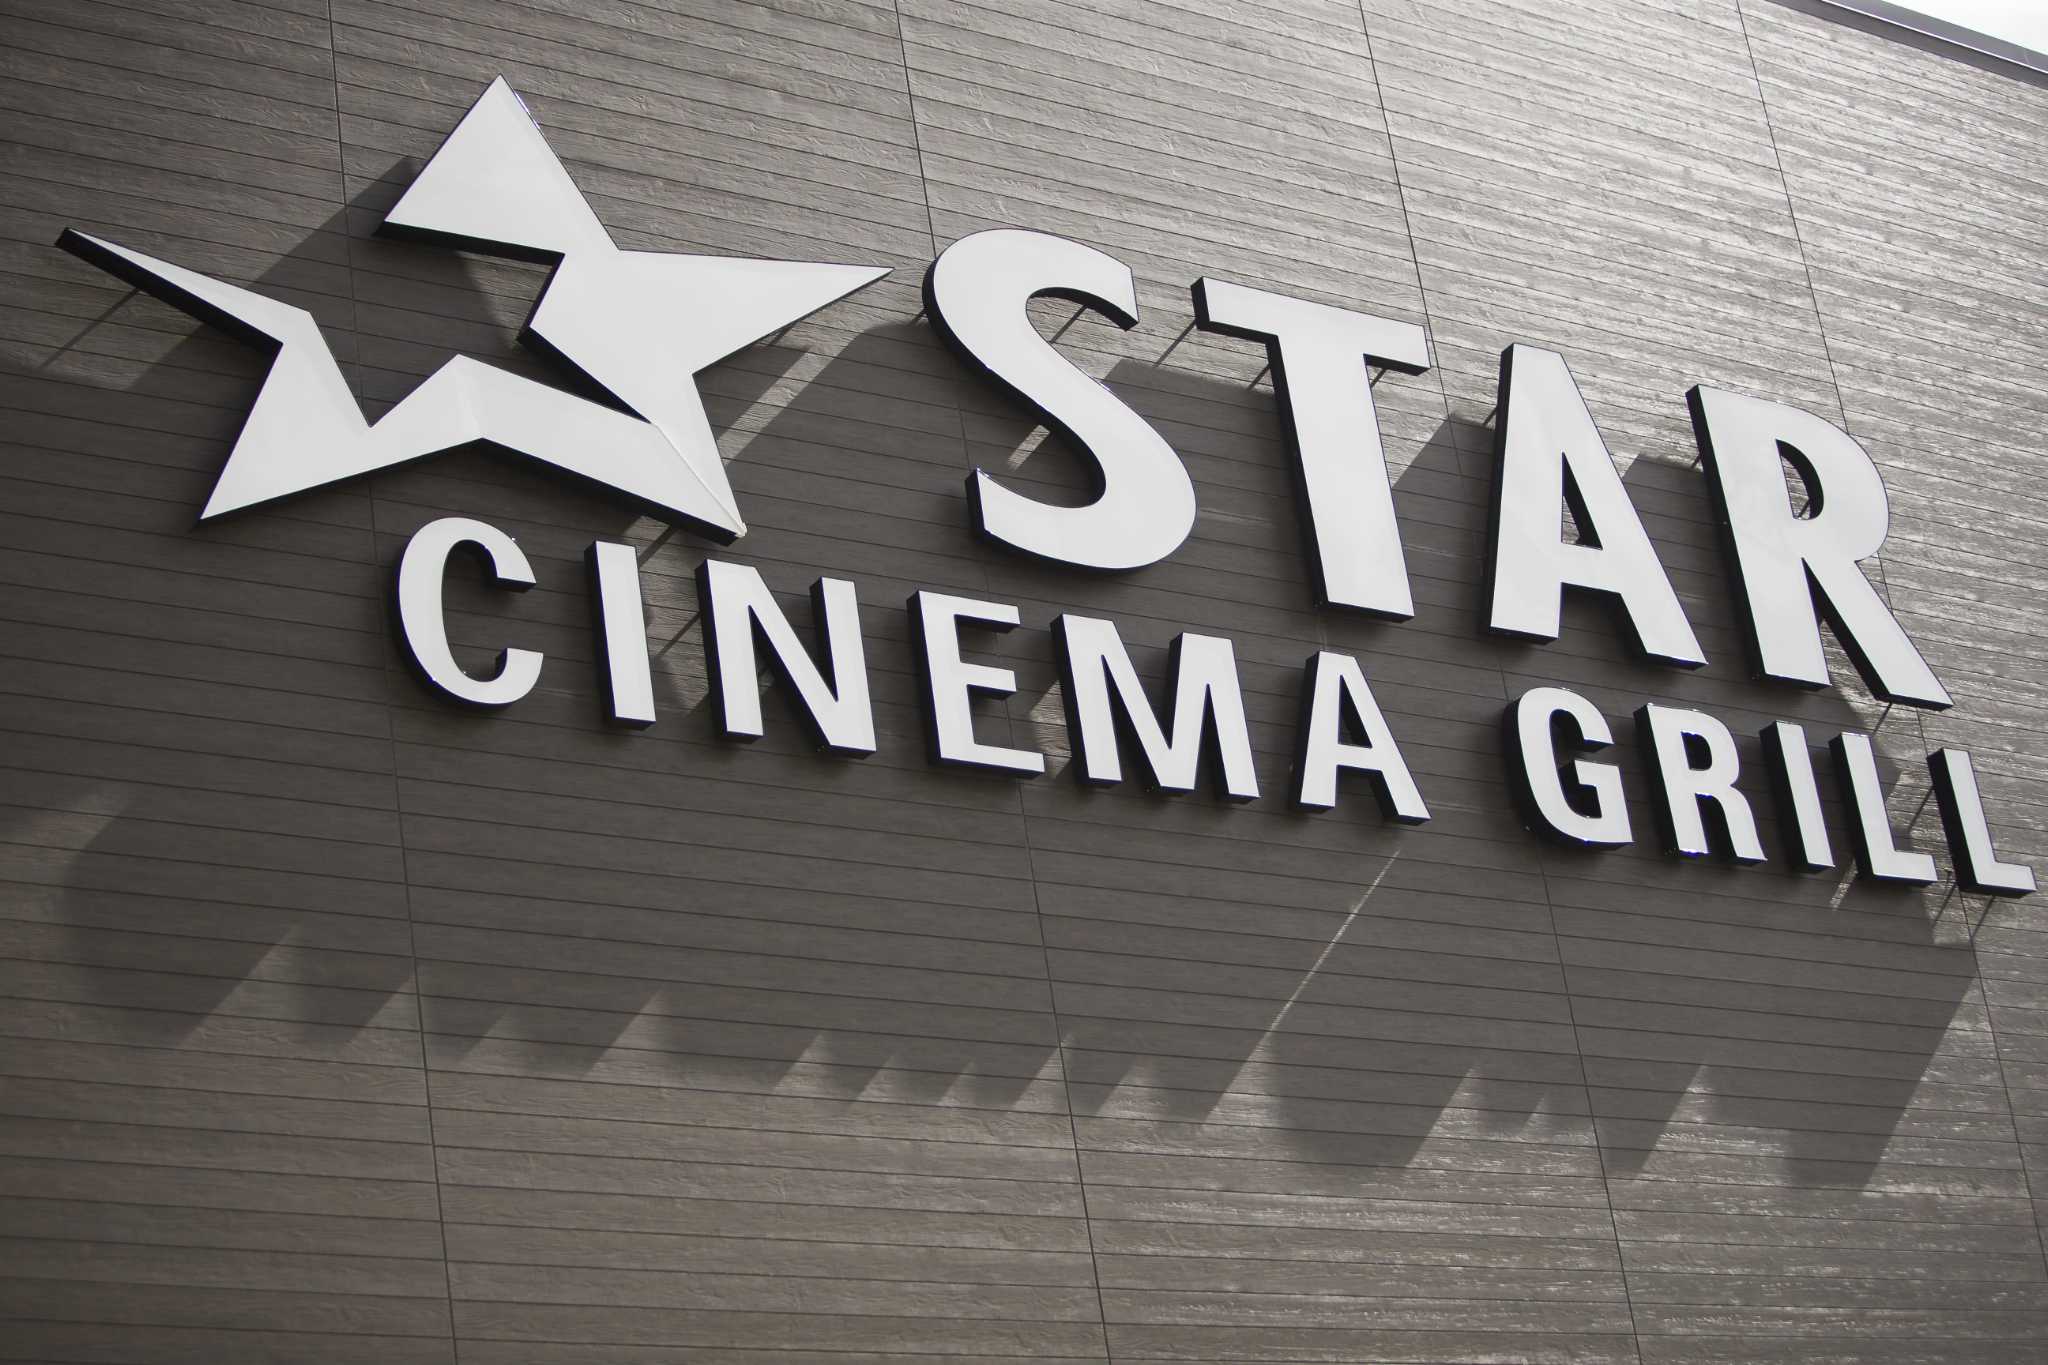 Star Cinema Grill To Temporarily Close As Movie Theaters Feel